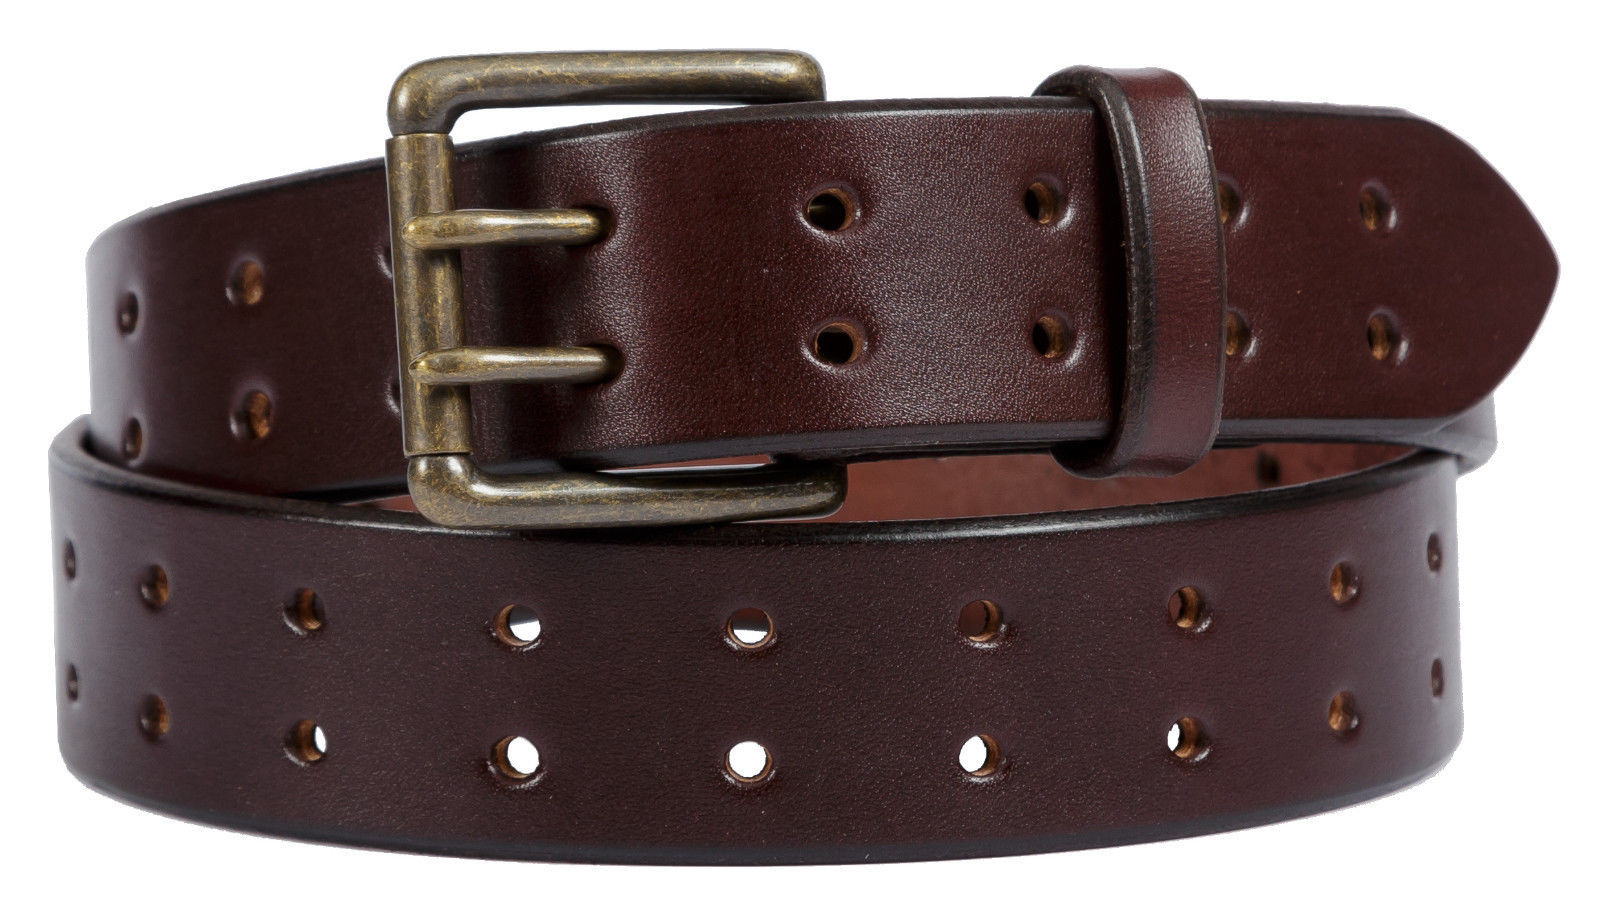 DOUBLE HOLE DUAL PRONG BELT - Thick Wide Heavy Duty 4 Colors Amish ...